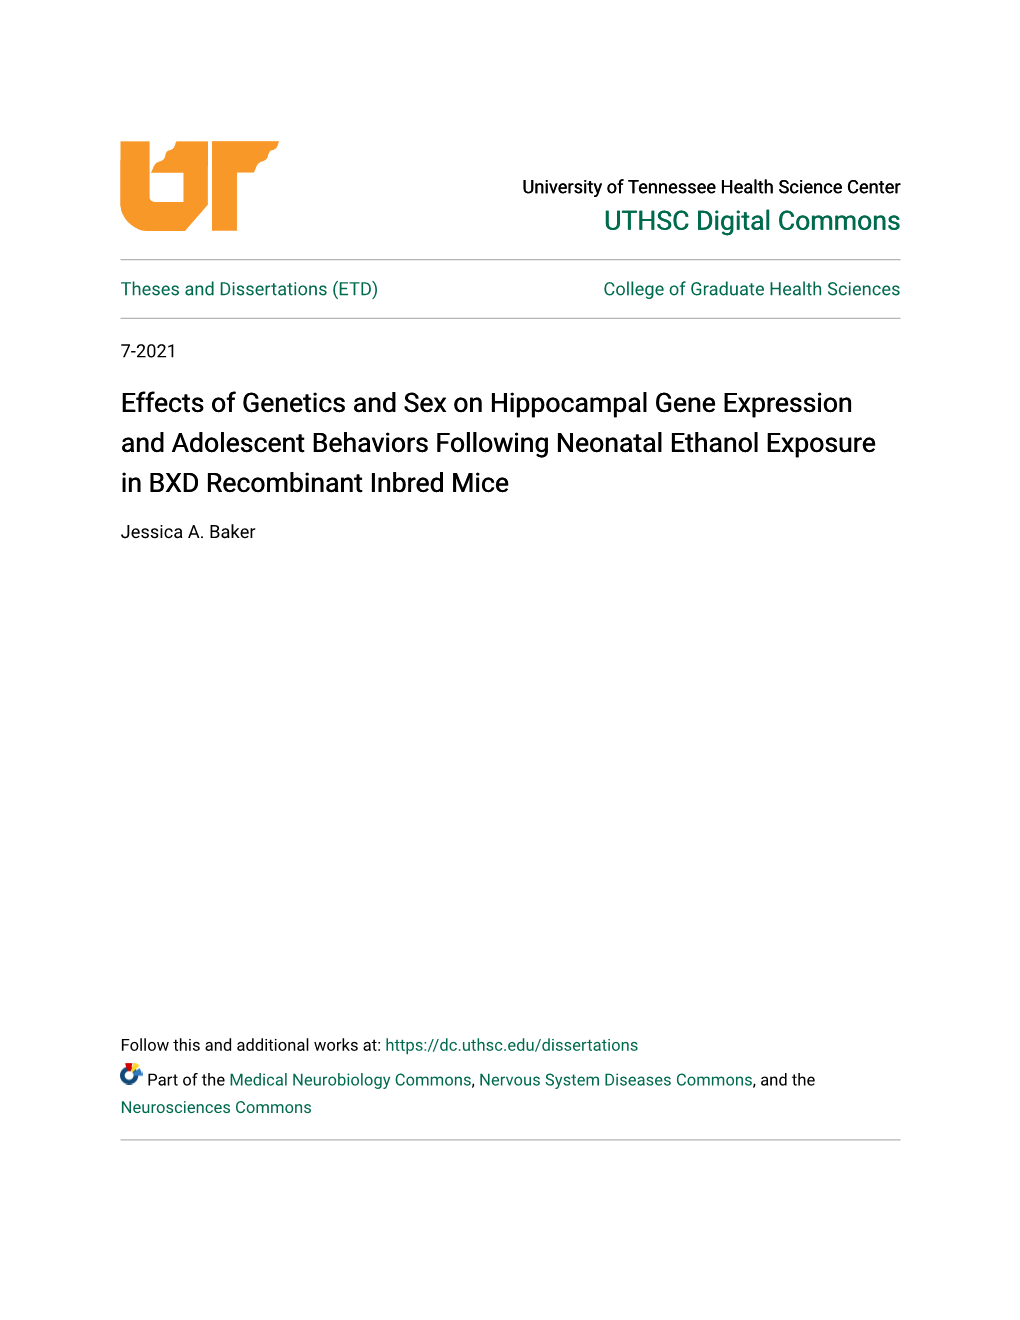 Effects of Genetics and Sex on Hippocampal Gene Expression and Adolescent Behaviors Following Neonatal Ethanol Exposure in BXD Recombinant Inbred Mice